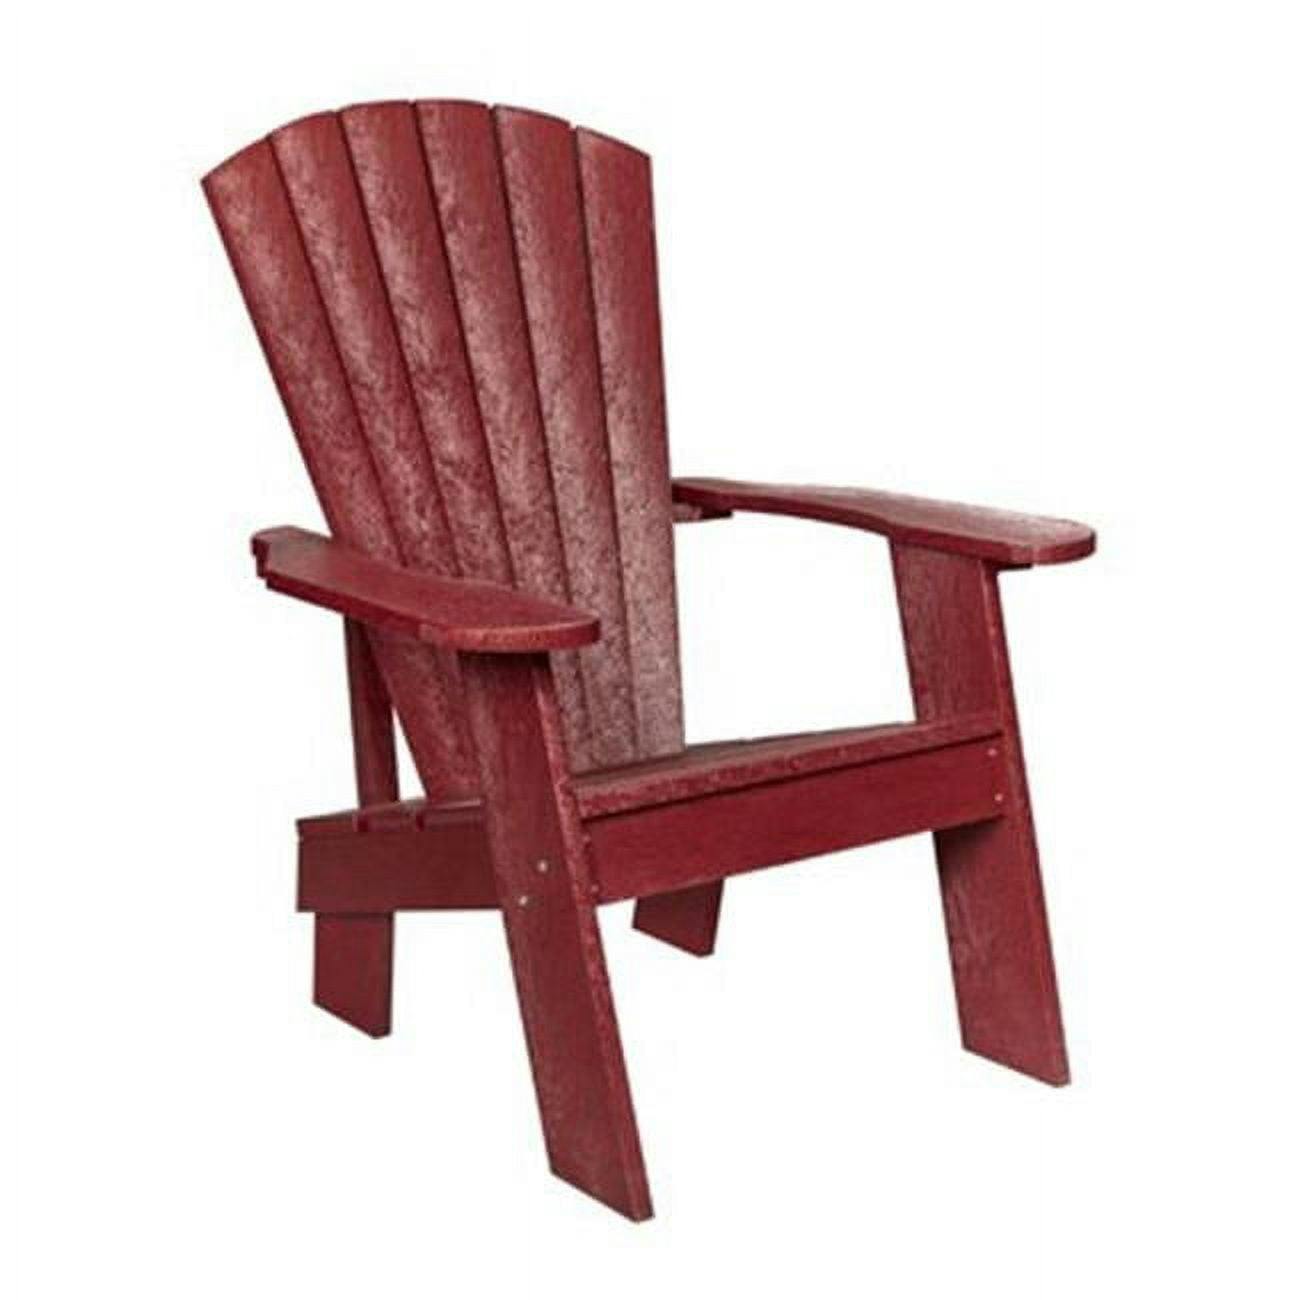 Capterra Casual Red Rock Recycled Plastic Adirondack Chair